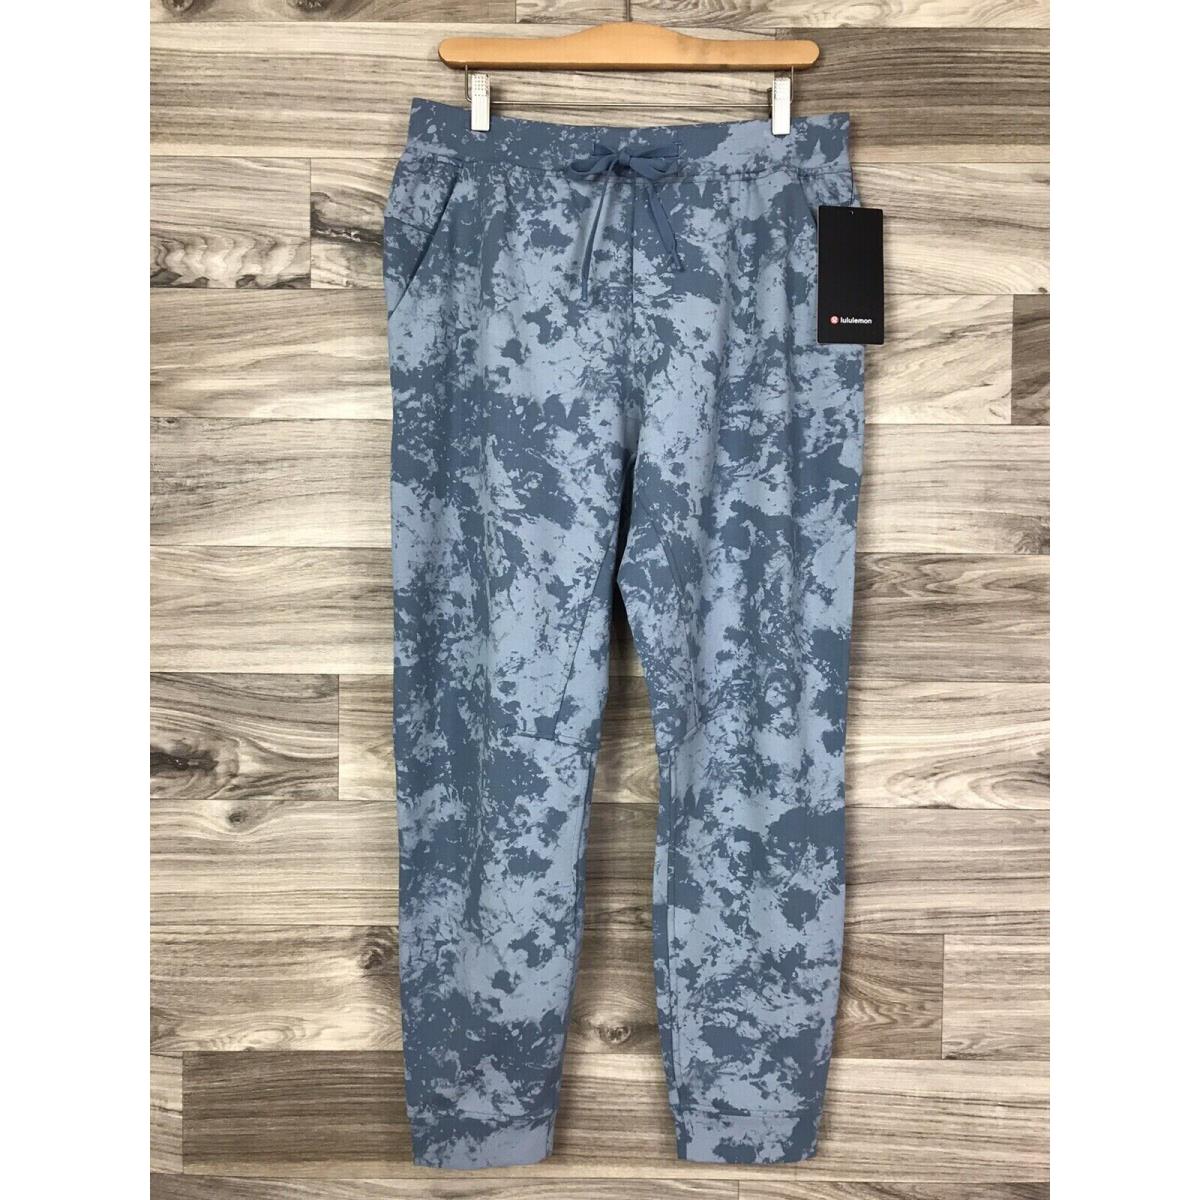 Lululemon City Sweat Jogger French Terry Size XL Spectral Cloud Blue SPE2